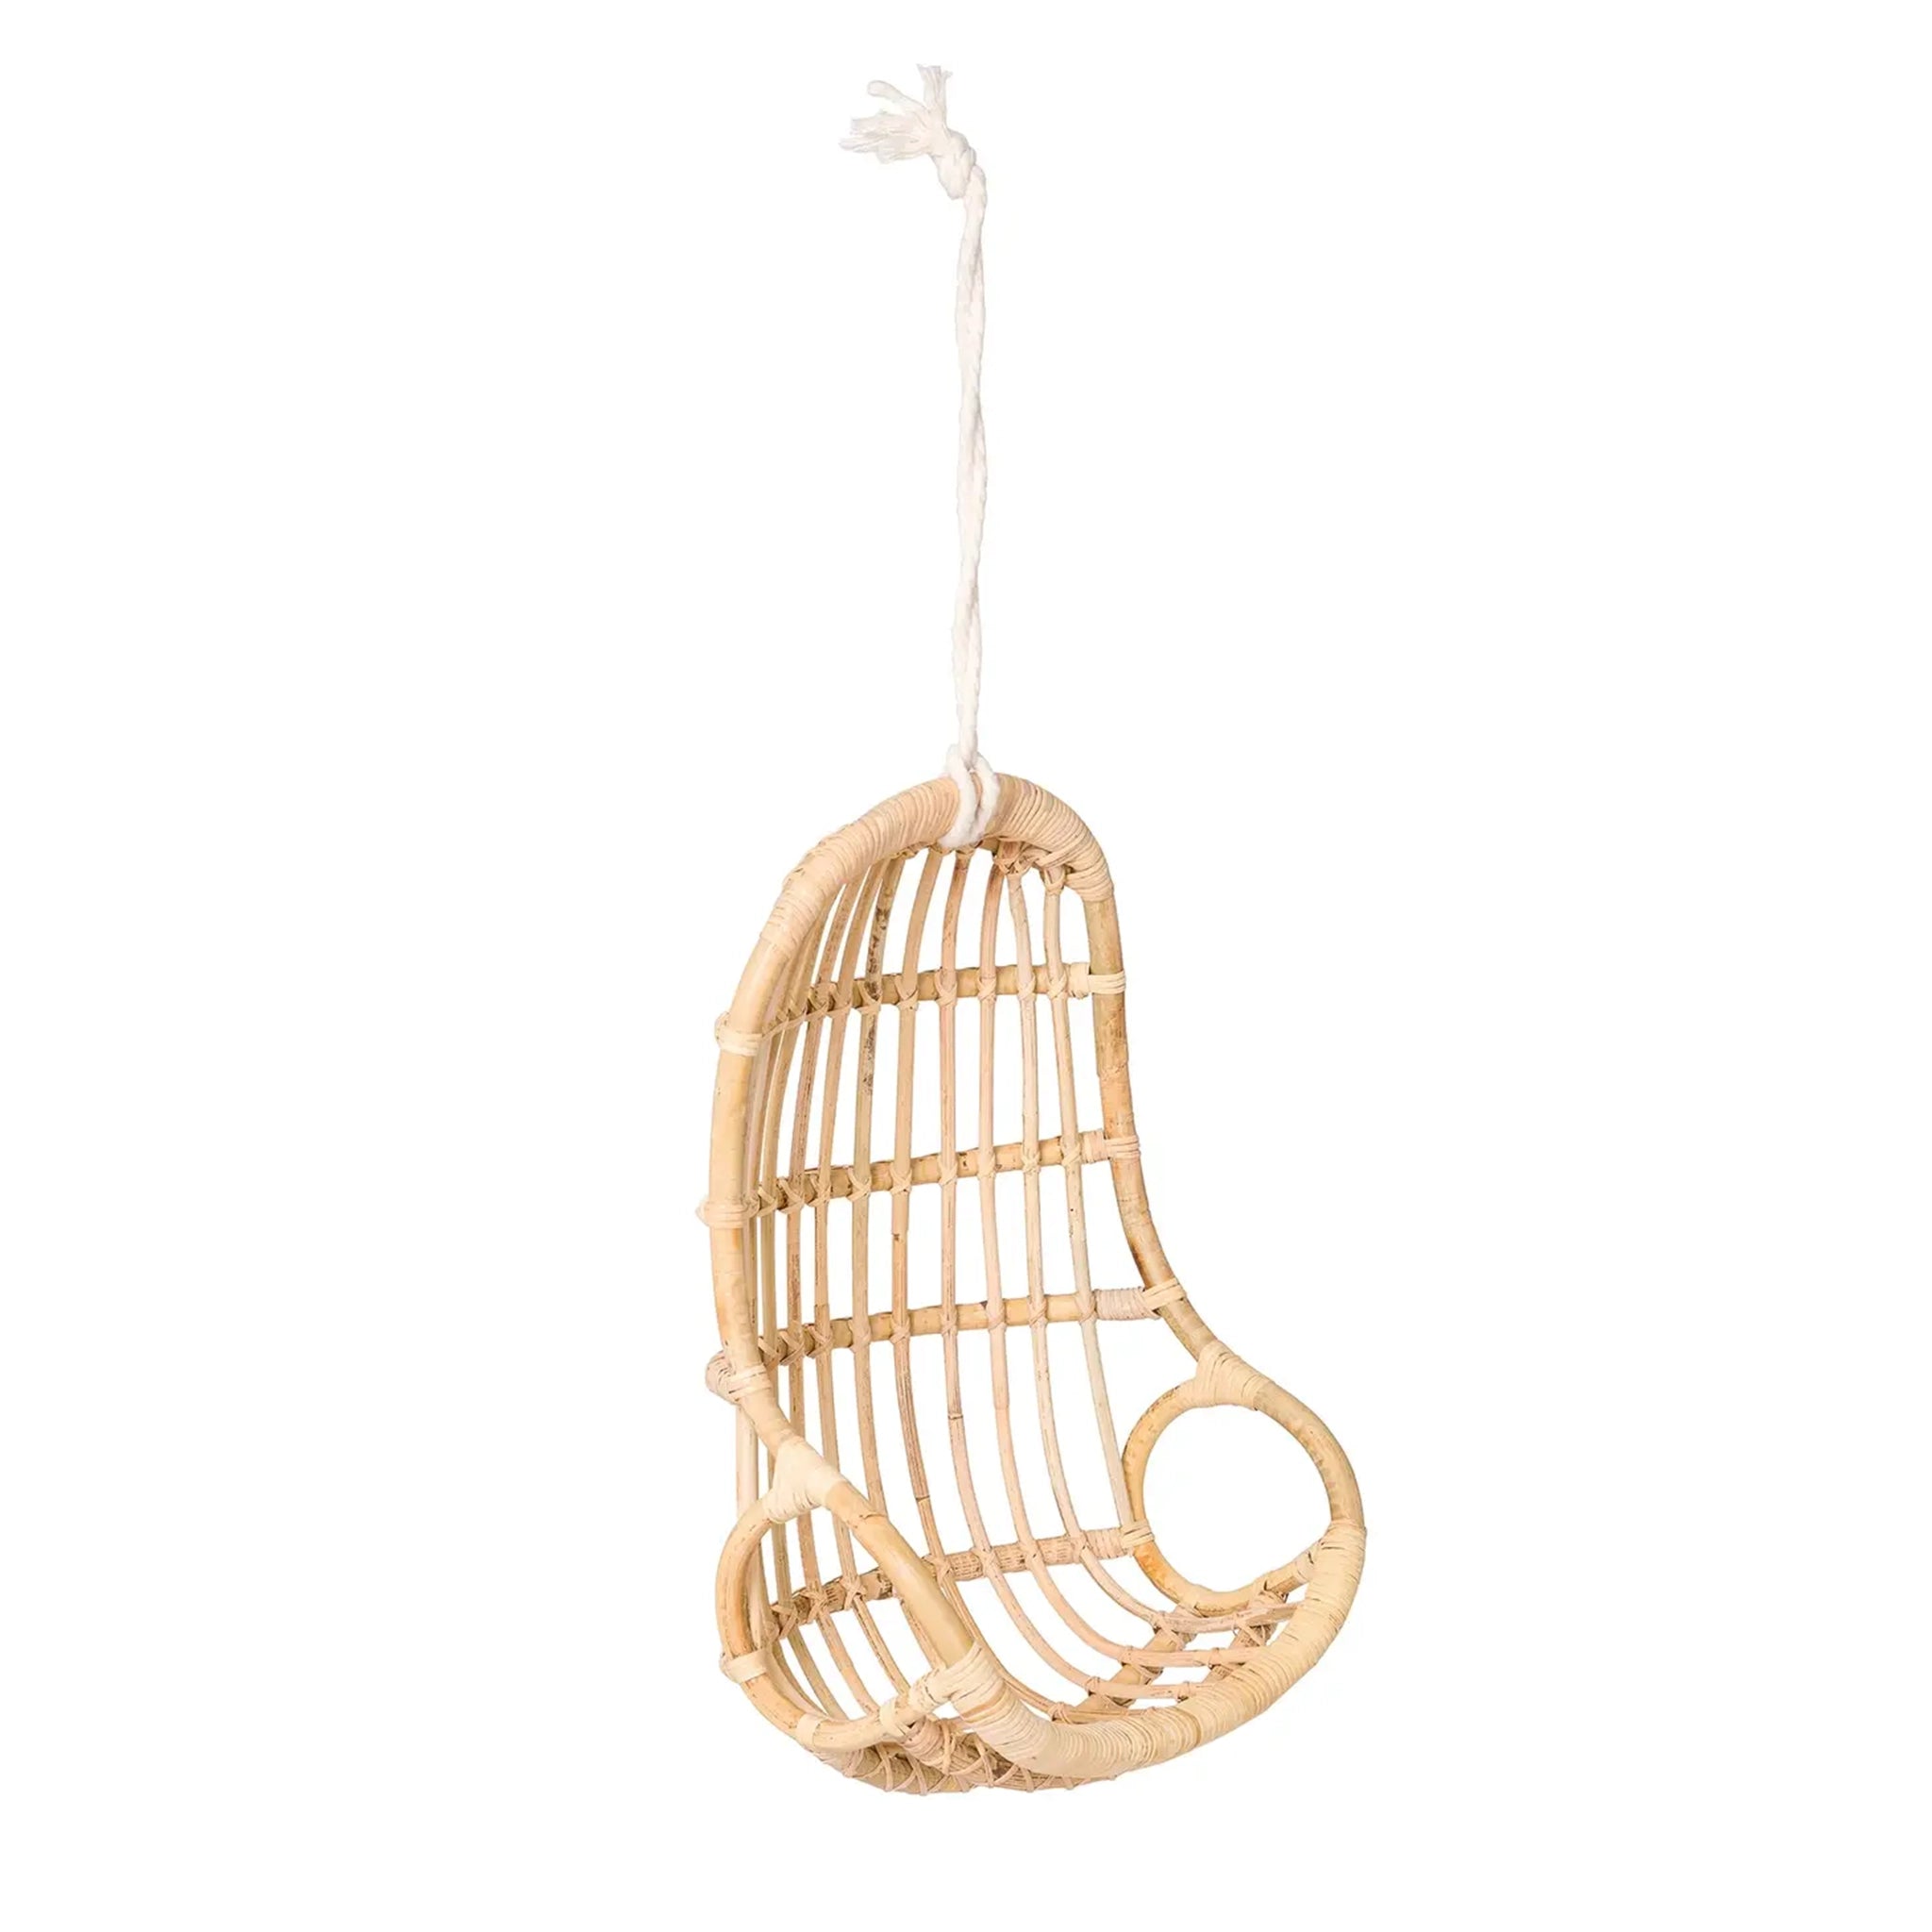 On a white background is a rattan egg shaped chair meant for baby dolls or toys. 